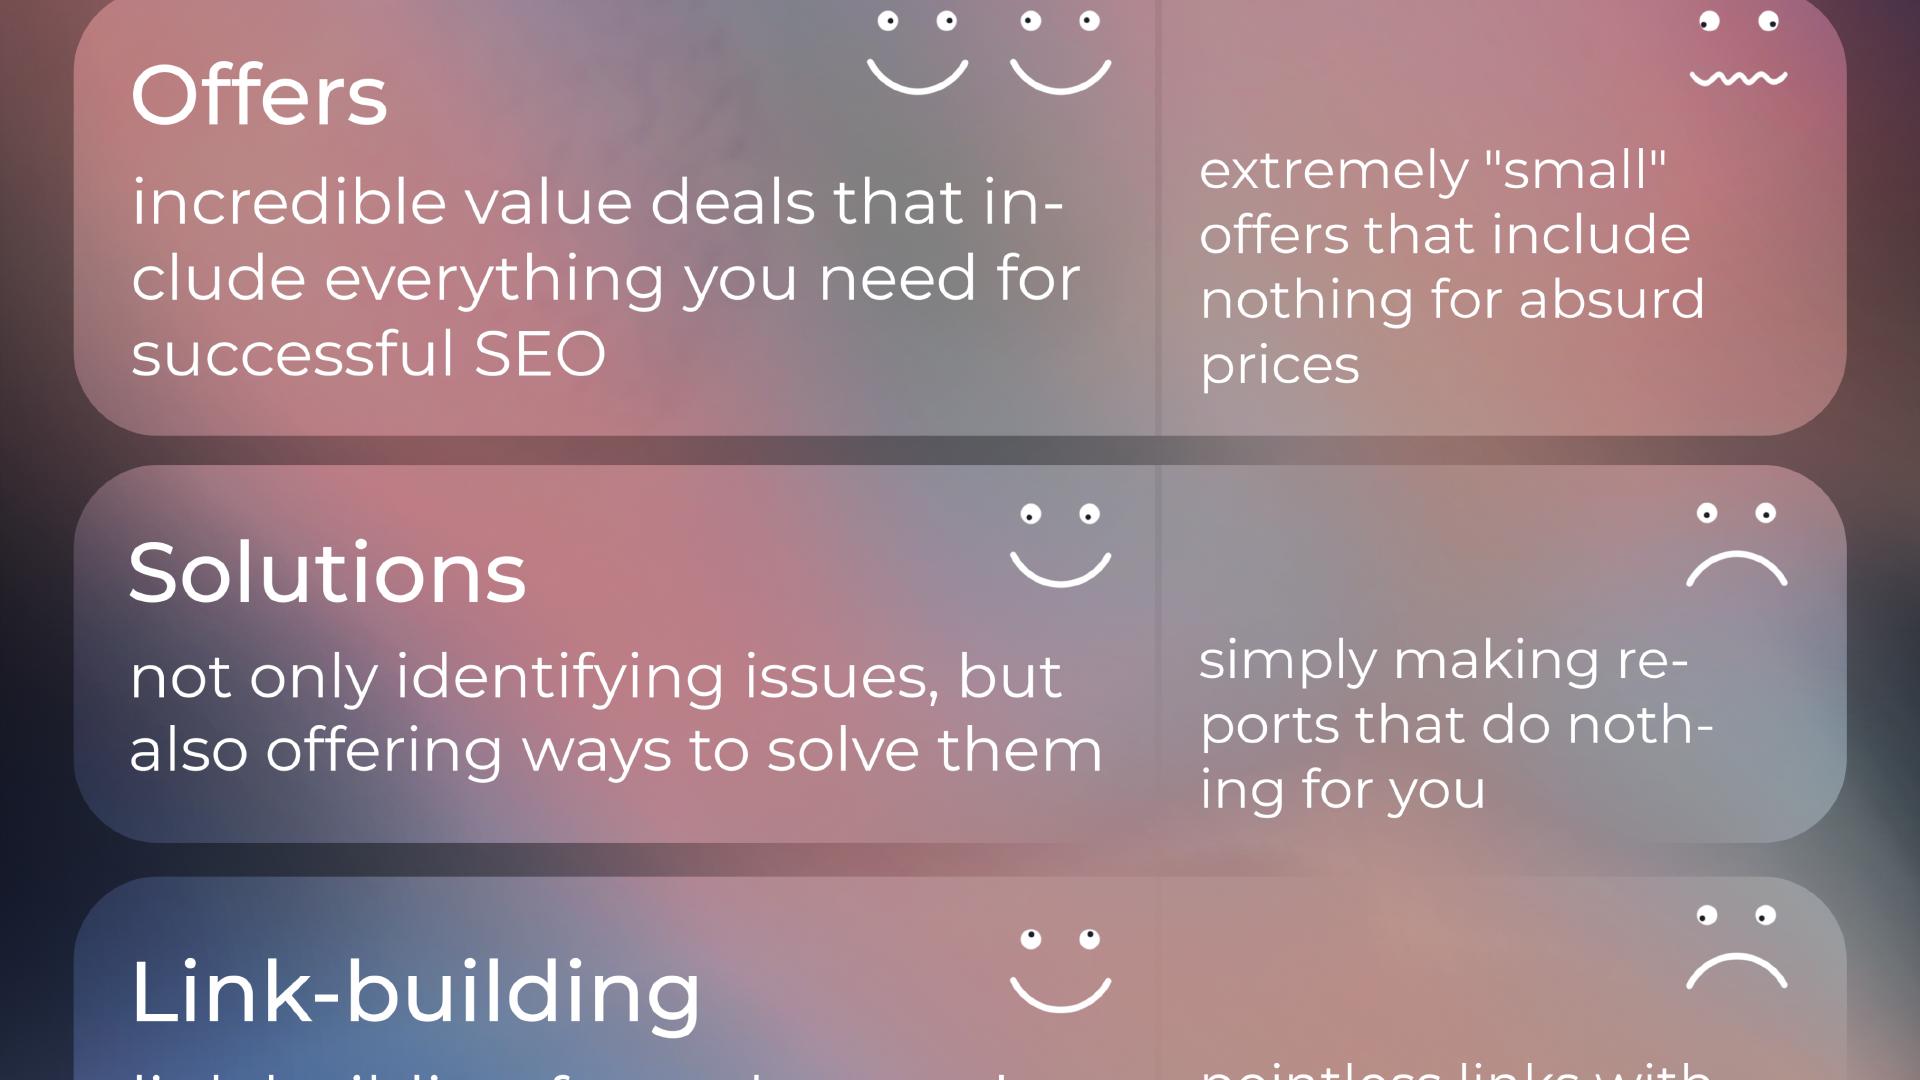 'Offers' - InterstellarSEO: incredible value deals that in- clude everything you need for successful SEO; Others: extremely 'small' offers that include nothing for absurd prices. 'Solutions' - InterstellarSEO: not only identifying issues, but also offering ways to solve them; Others: simply making reports that do nothing for you. 'Link-building' - InterstellarSEO: link building for real natural growth, not for show; Others: pointless link with no value.